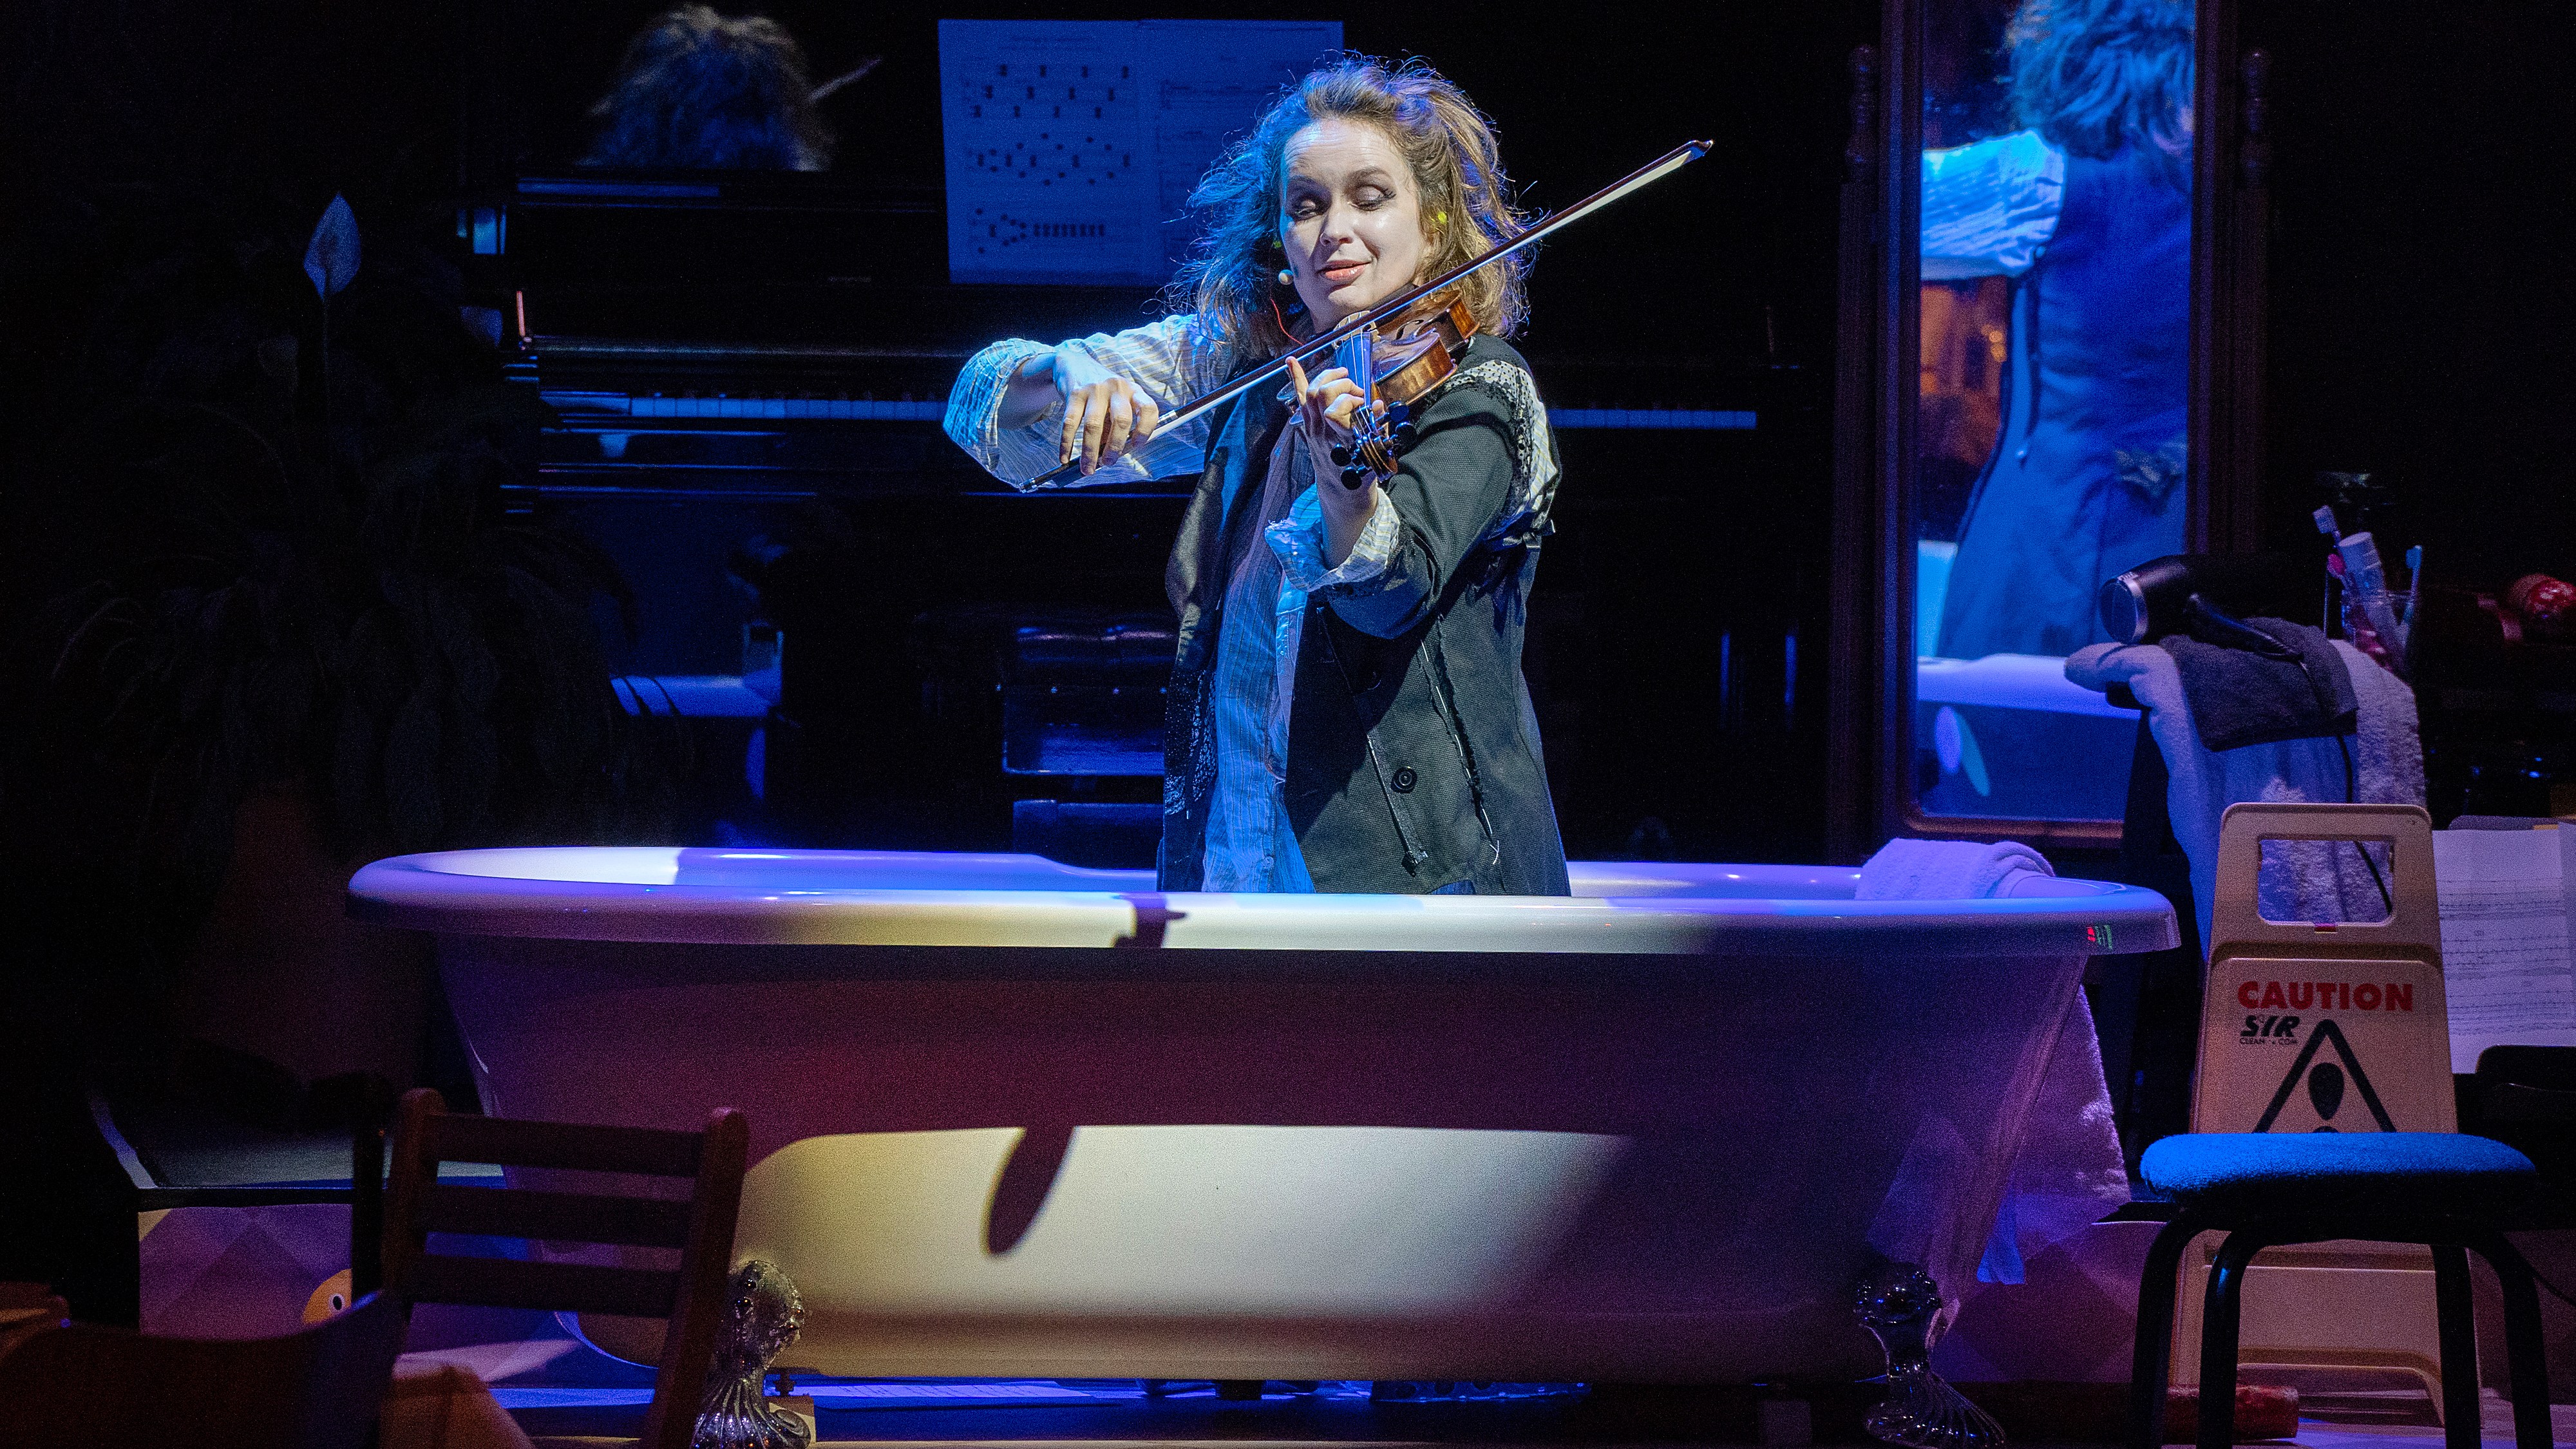 The violinist Patricia Kopatchinskaja in Everyday Non-sense at the Southbank Centre